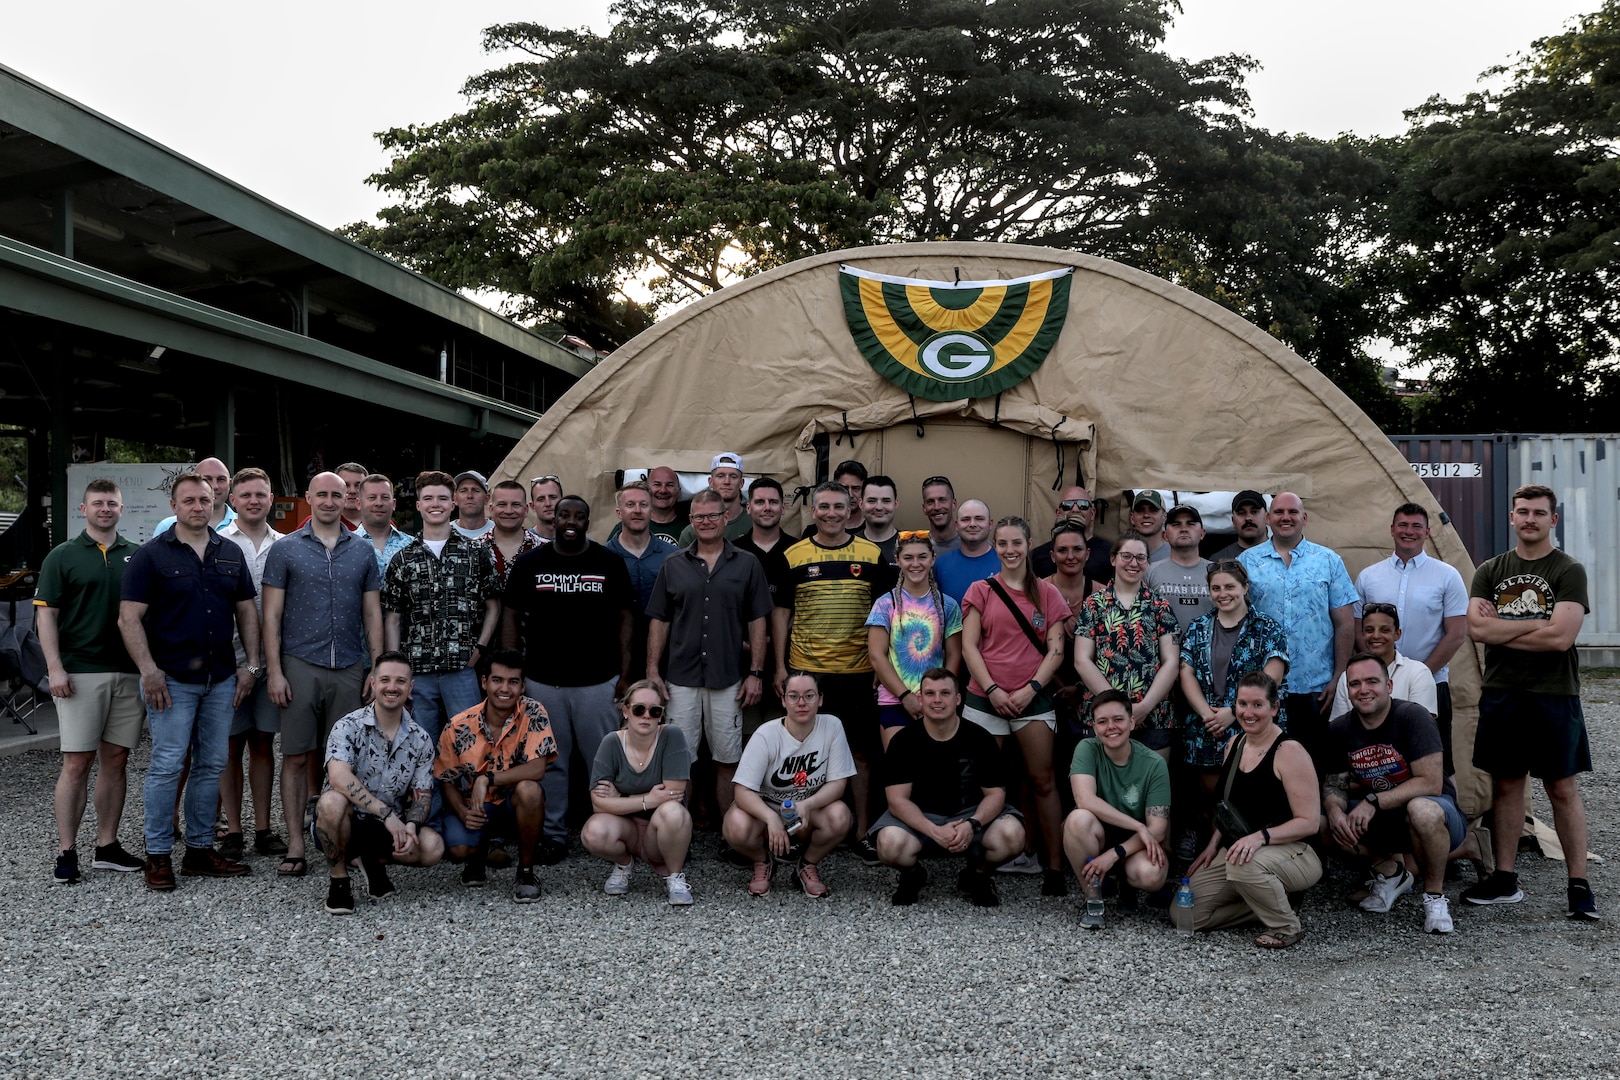 Forty Wisconsin National Guard Airmen and Soldiers trained with the Papua New Guinea Defence Force in Port Moresby, Papua New Guinea, March 17-22 as part of the State Partnership Program. The Wisconsin National Guard and Papua New Guinea have been partners in the Department of Defense National Guard Bureau program since 2020.